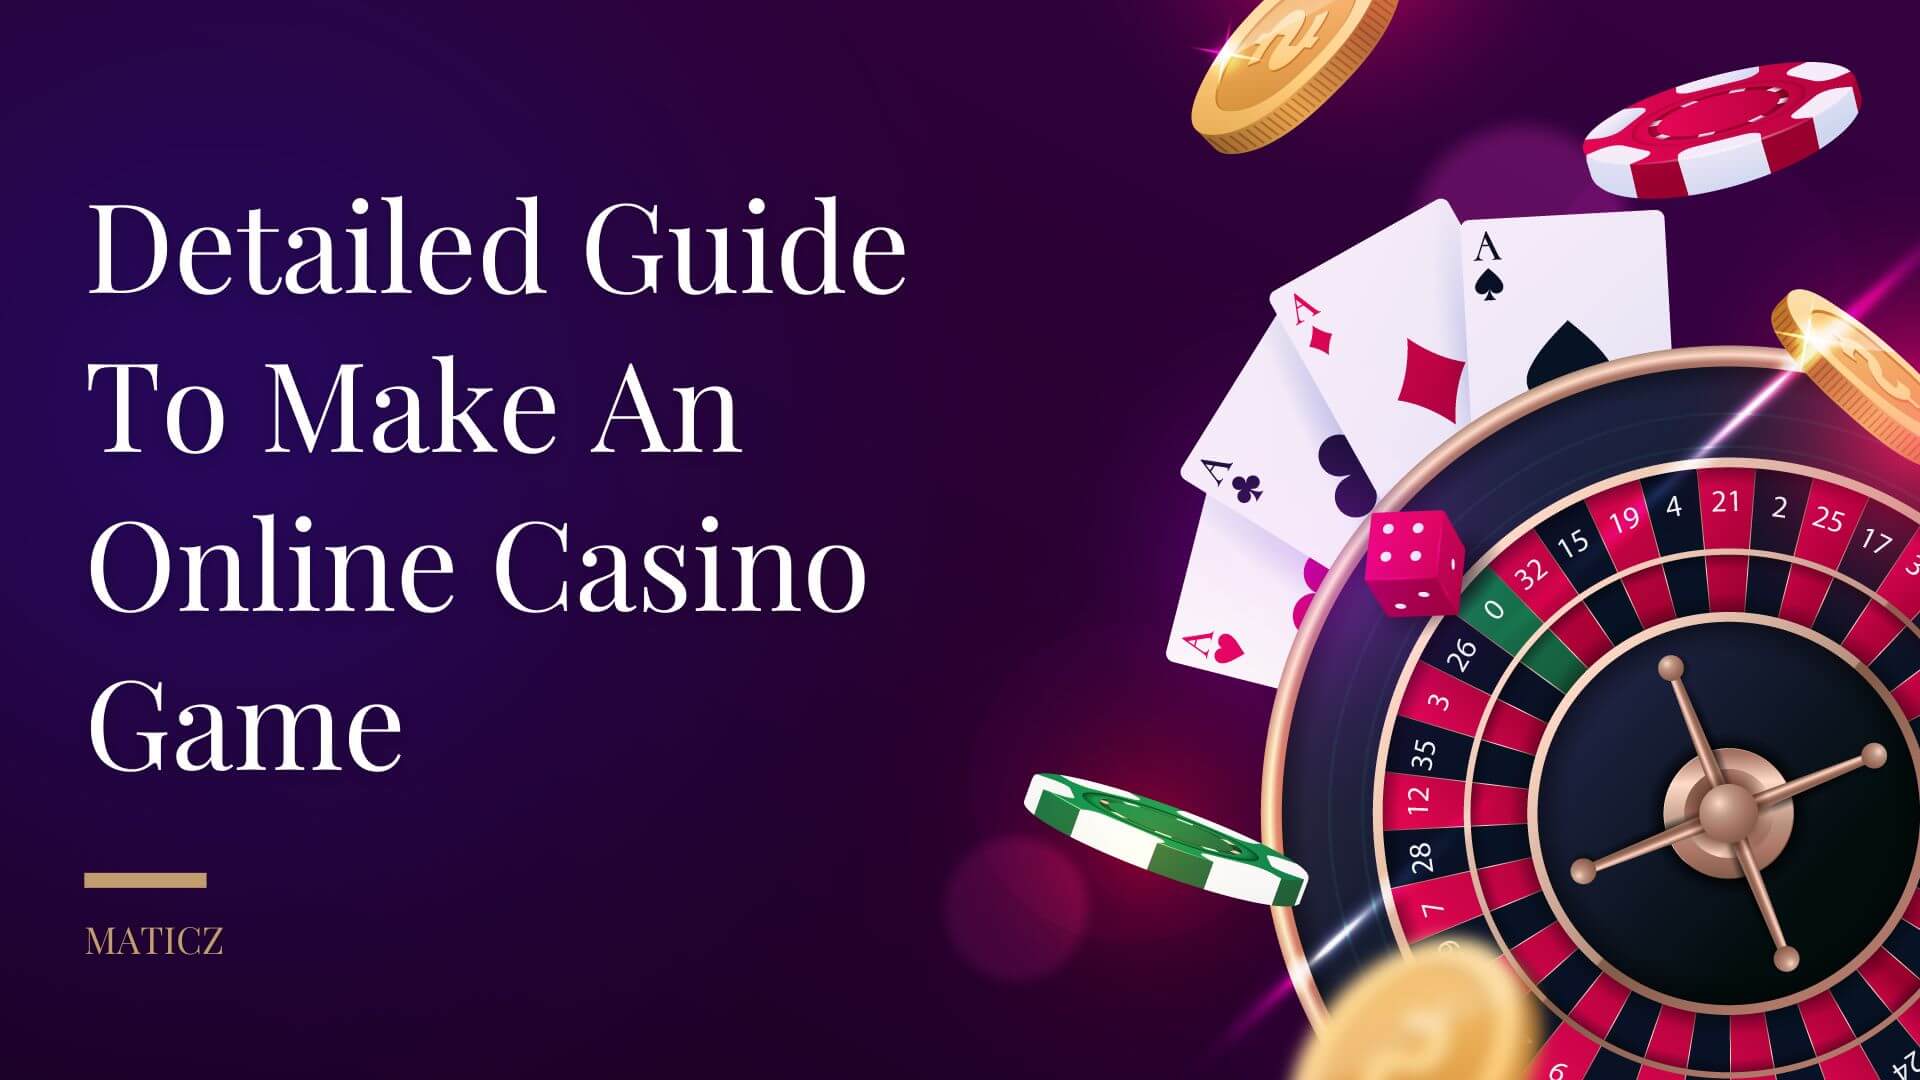 How to Make an Online Casino: 10 Steps to Build Casino Game